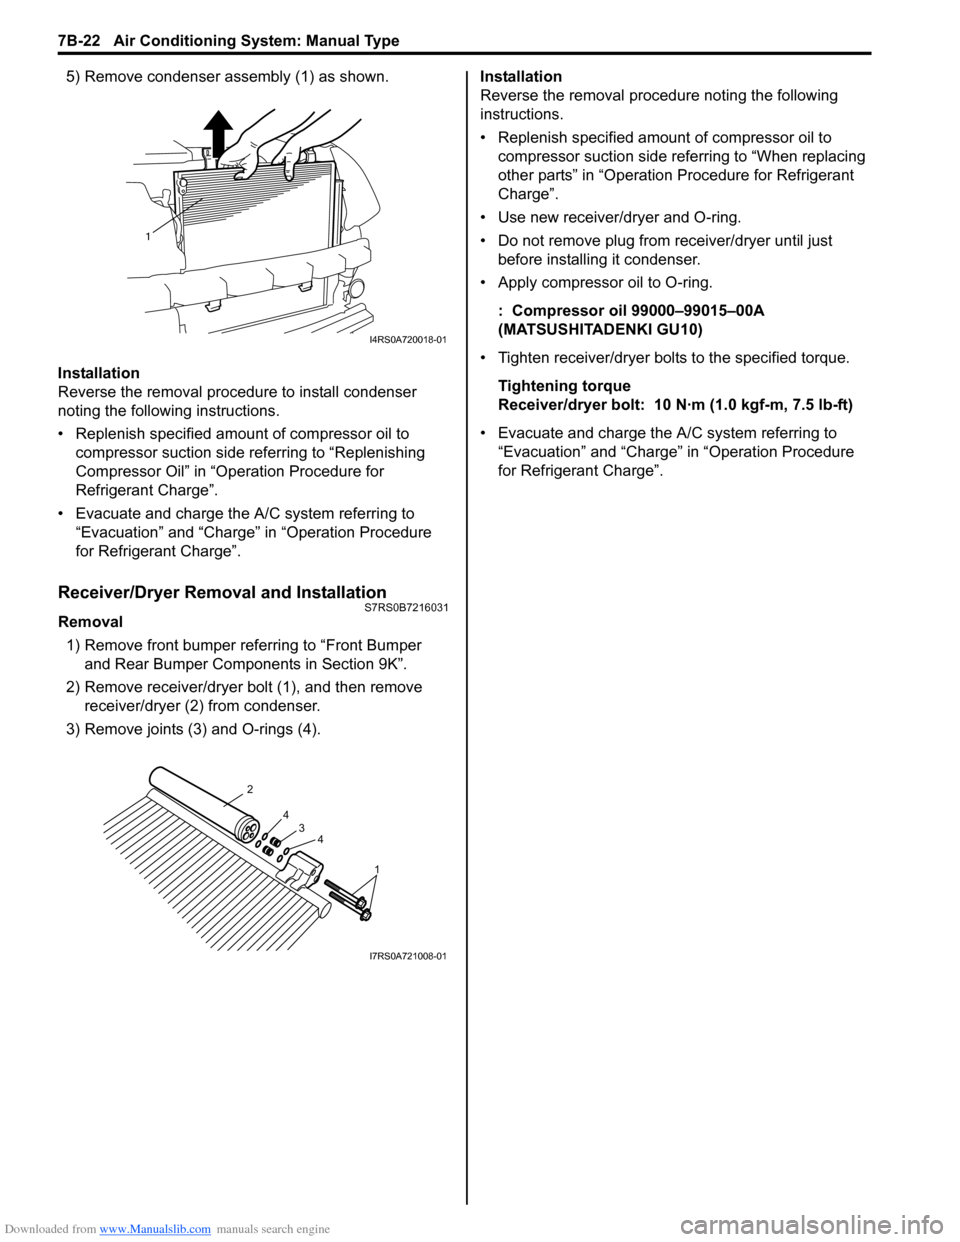 SUZUKI SWIFT 2006 2.G Service Owners Manual Downloaded from www.Manualslib.com manuals search engine 7B-22 Air Conditioning System: Manual Type
5) Remove condenser assembly (1) as shown.
Installation
Reverse the removal procedure to install con